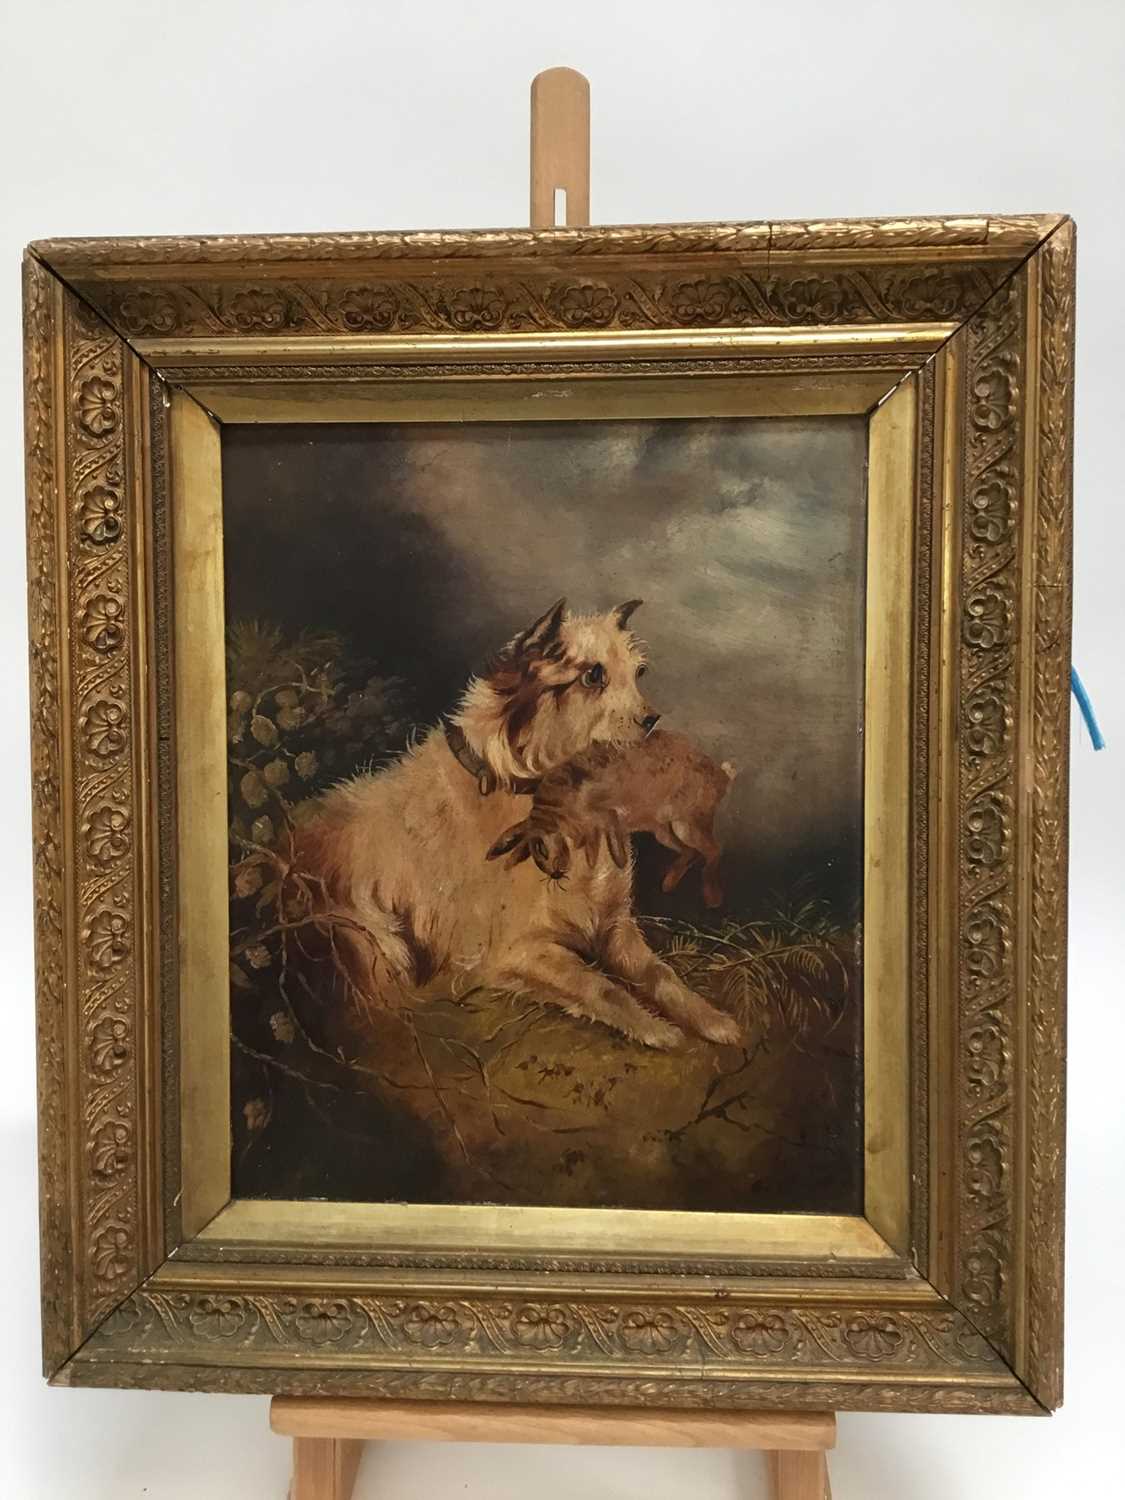 Manner of Edward Armfield, late 19th century, oil on artist board, Terrier with a rabbit, in gilt fr